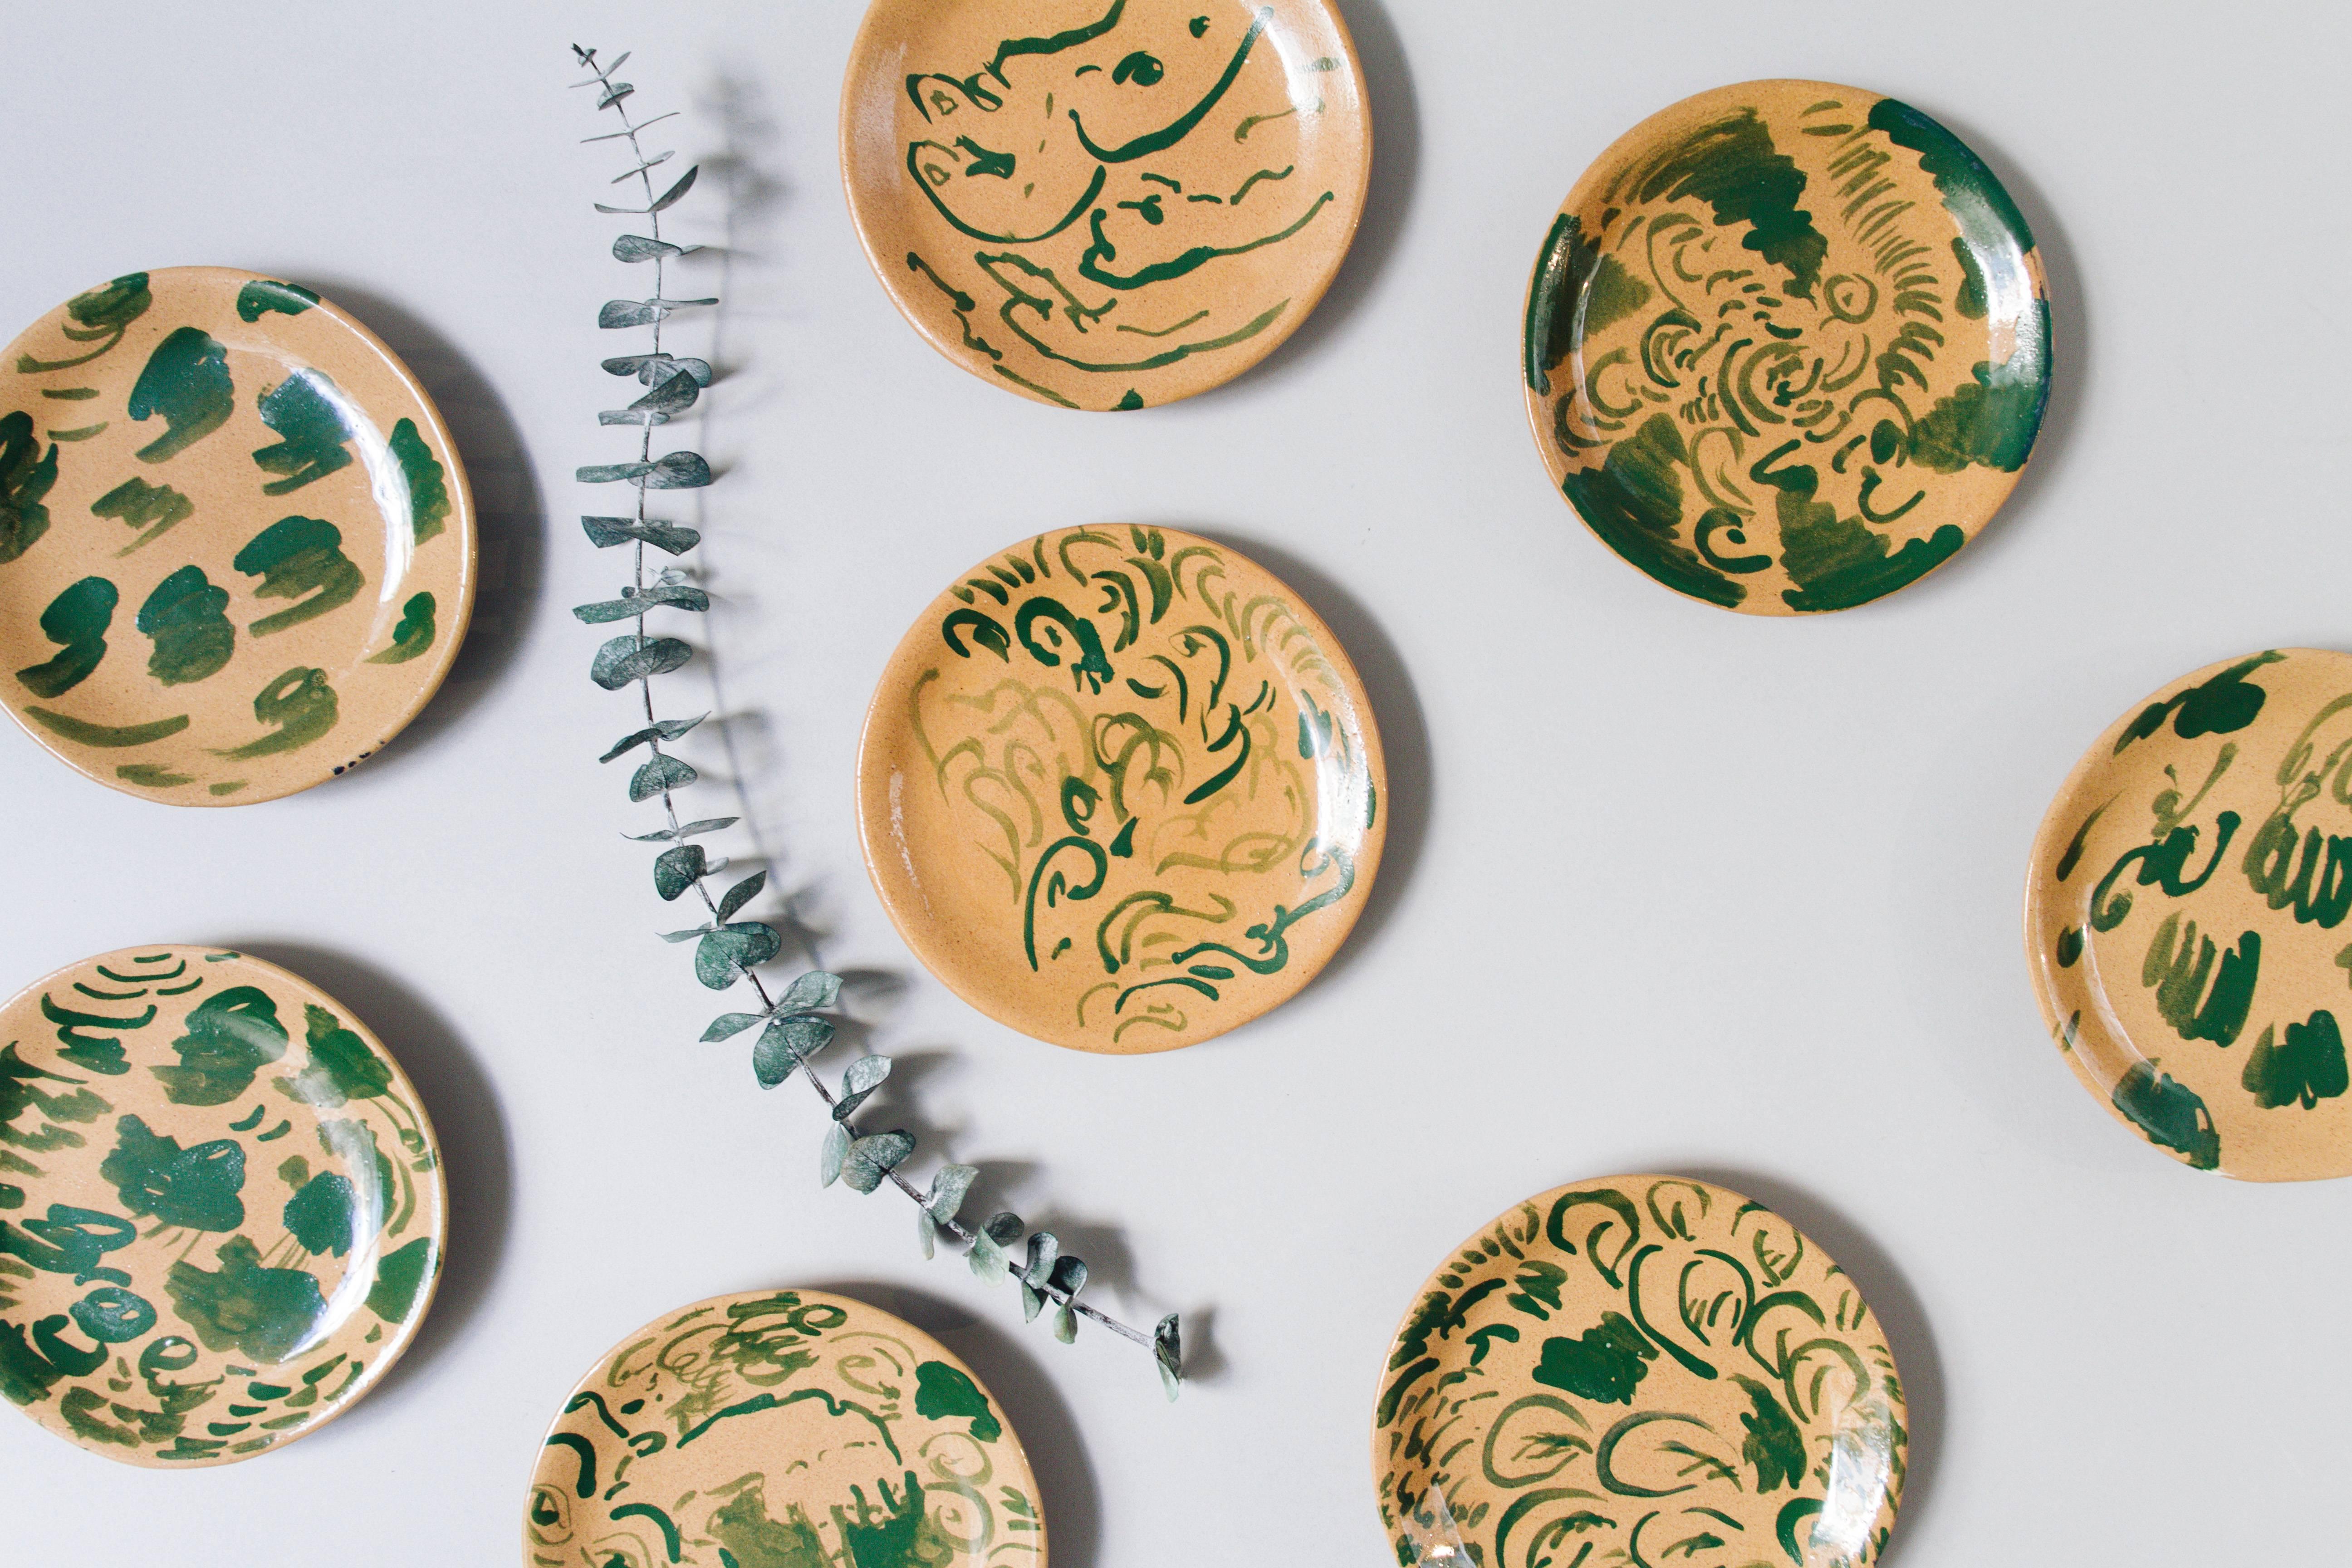 This Majolica pottery plate collection was designed by Mexican sculptor, painter, and ceramist Lorenzo Lorenzzo made in his studio, in the colonial town of San Miguel de Allende. 

“I didn’t sleep at all; my mind could not stop thinking. I could